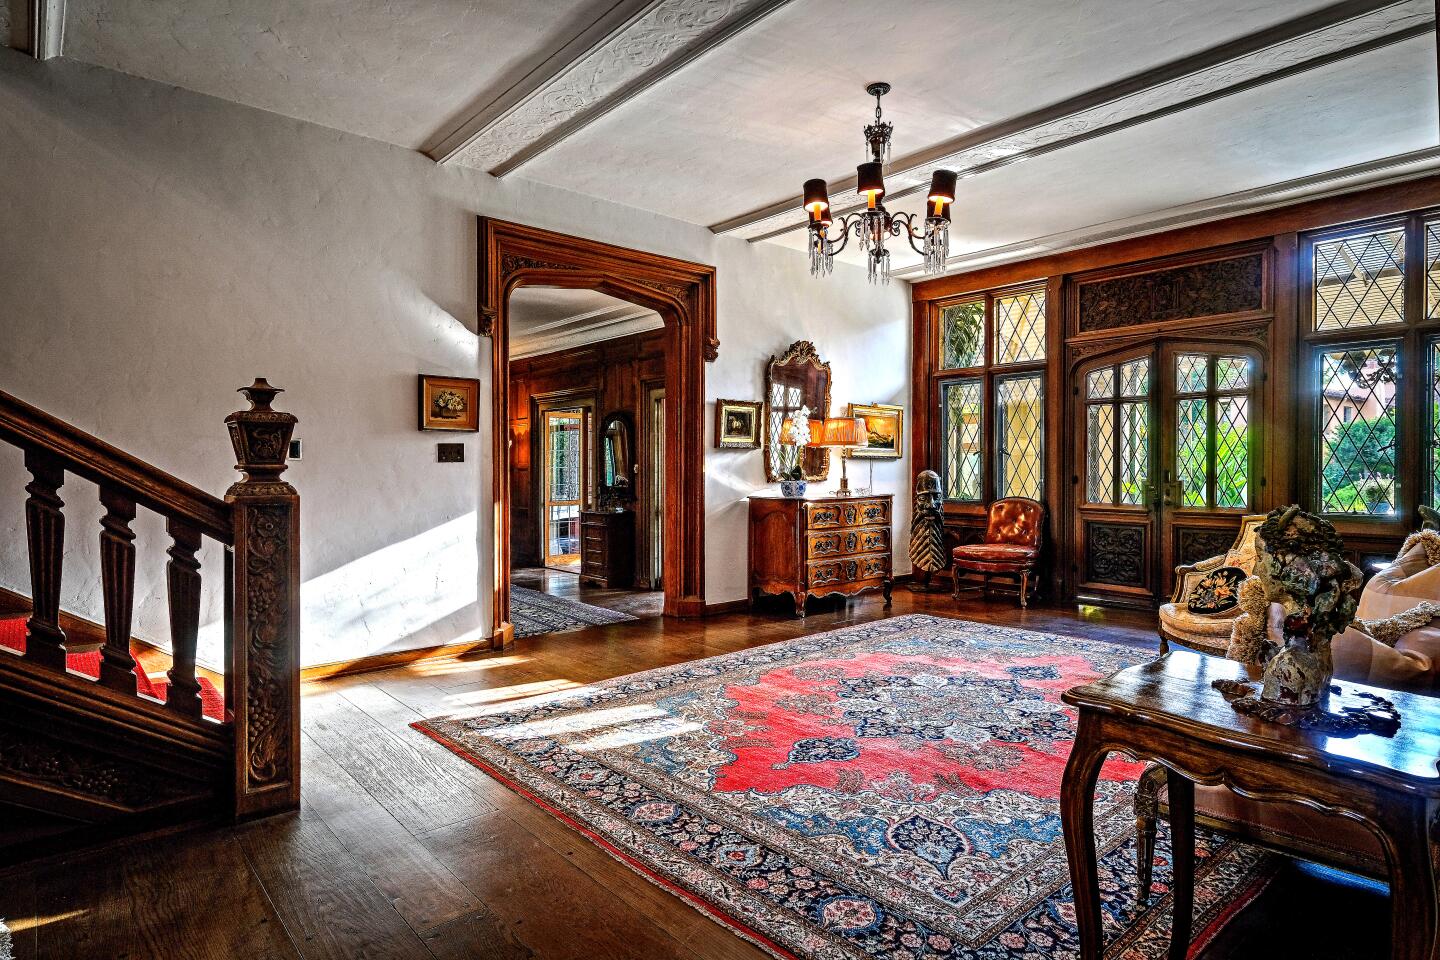 A rug adorns the entryway to the home, with hardwood floors and a staircase